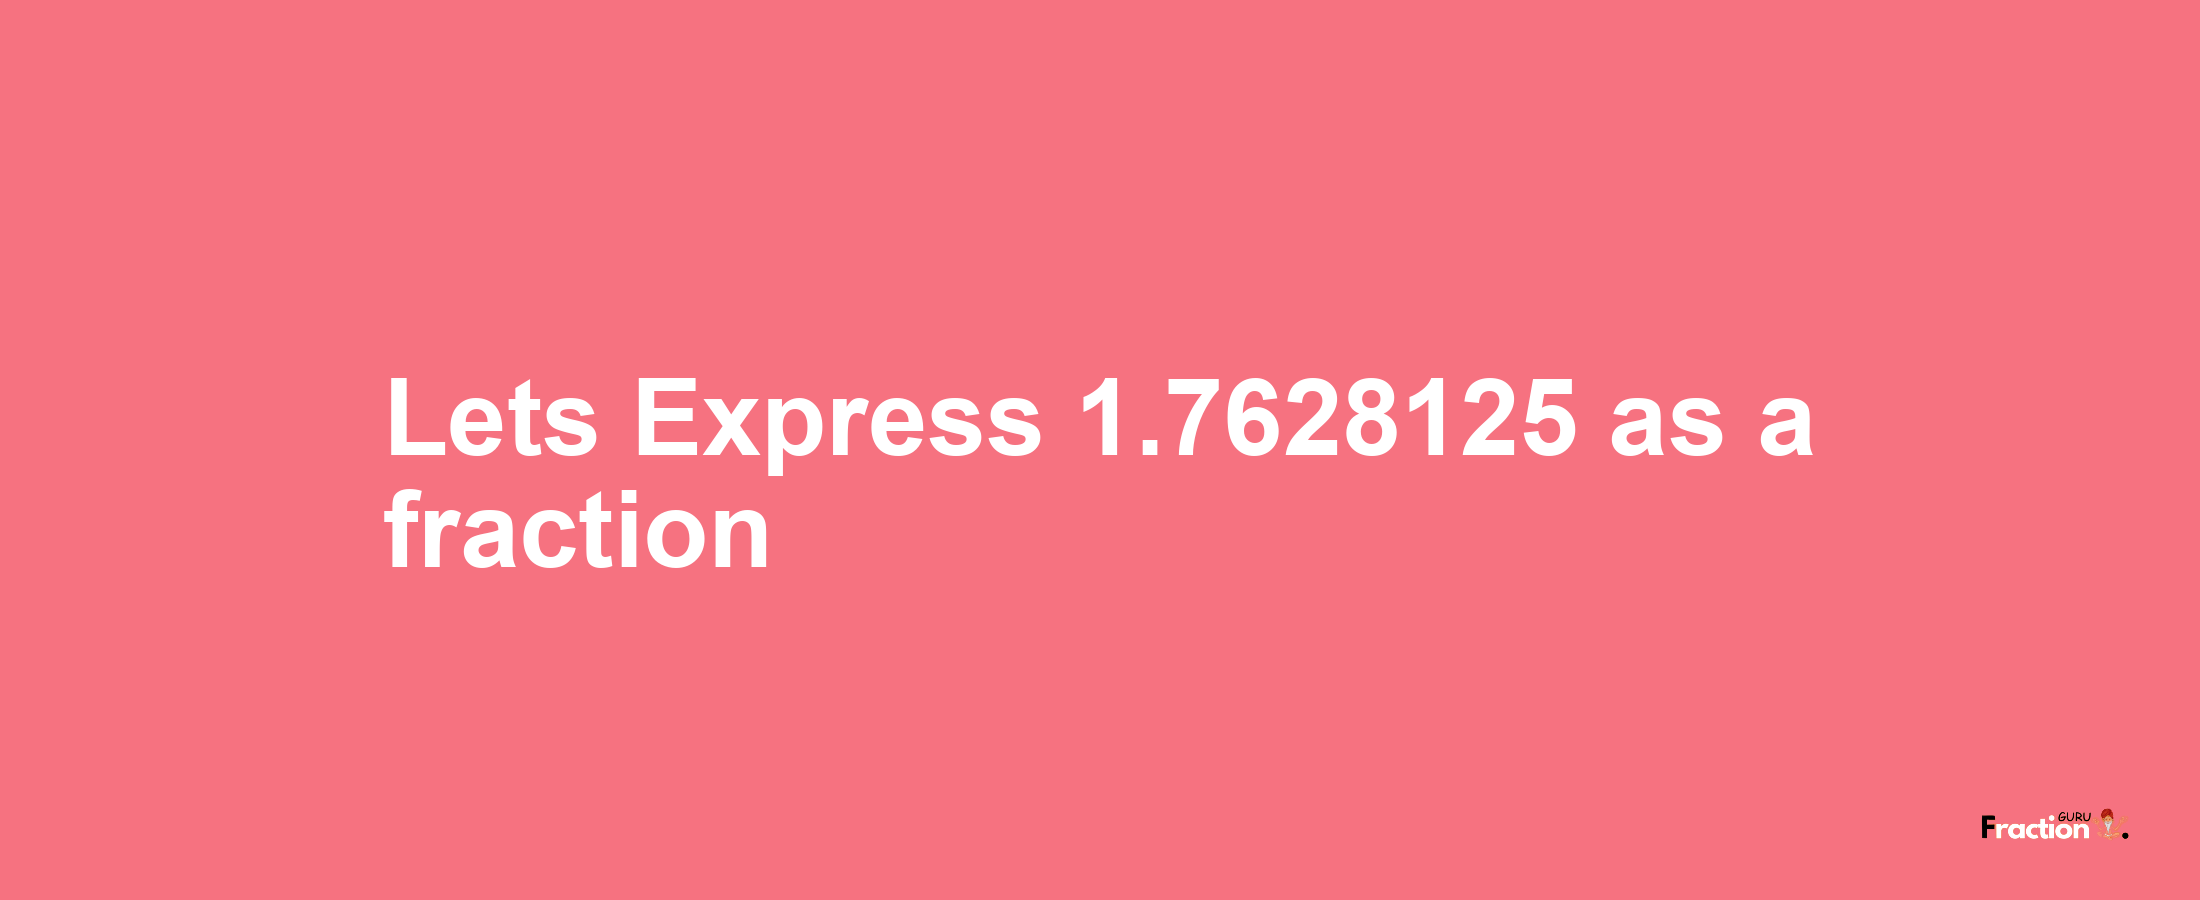 Lets Express 1.7628125 as afraction